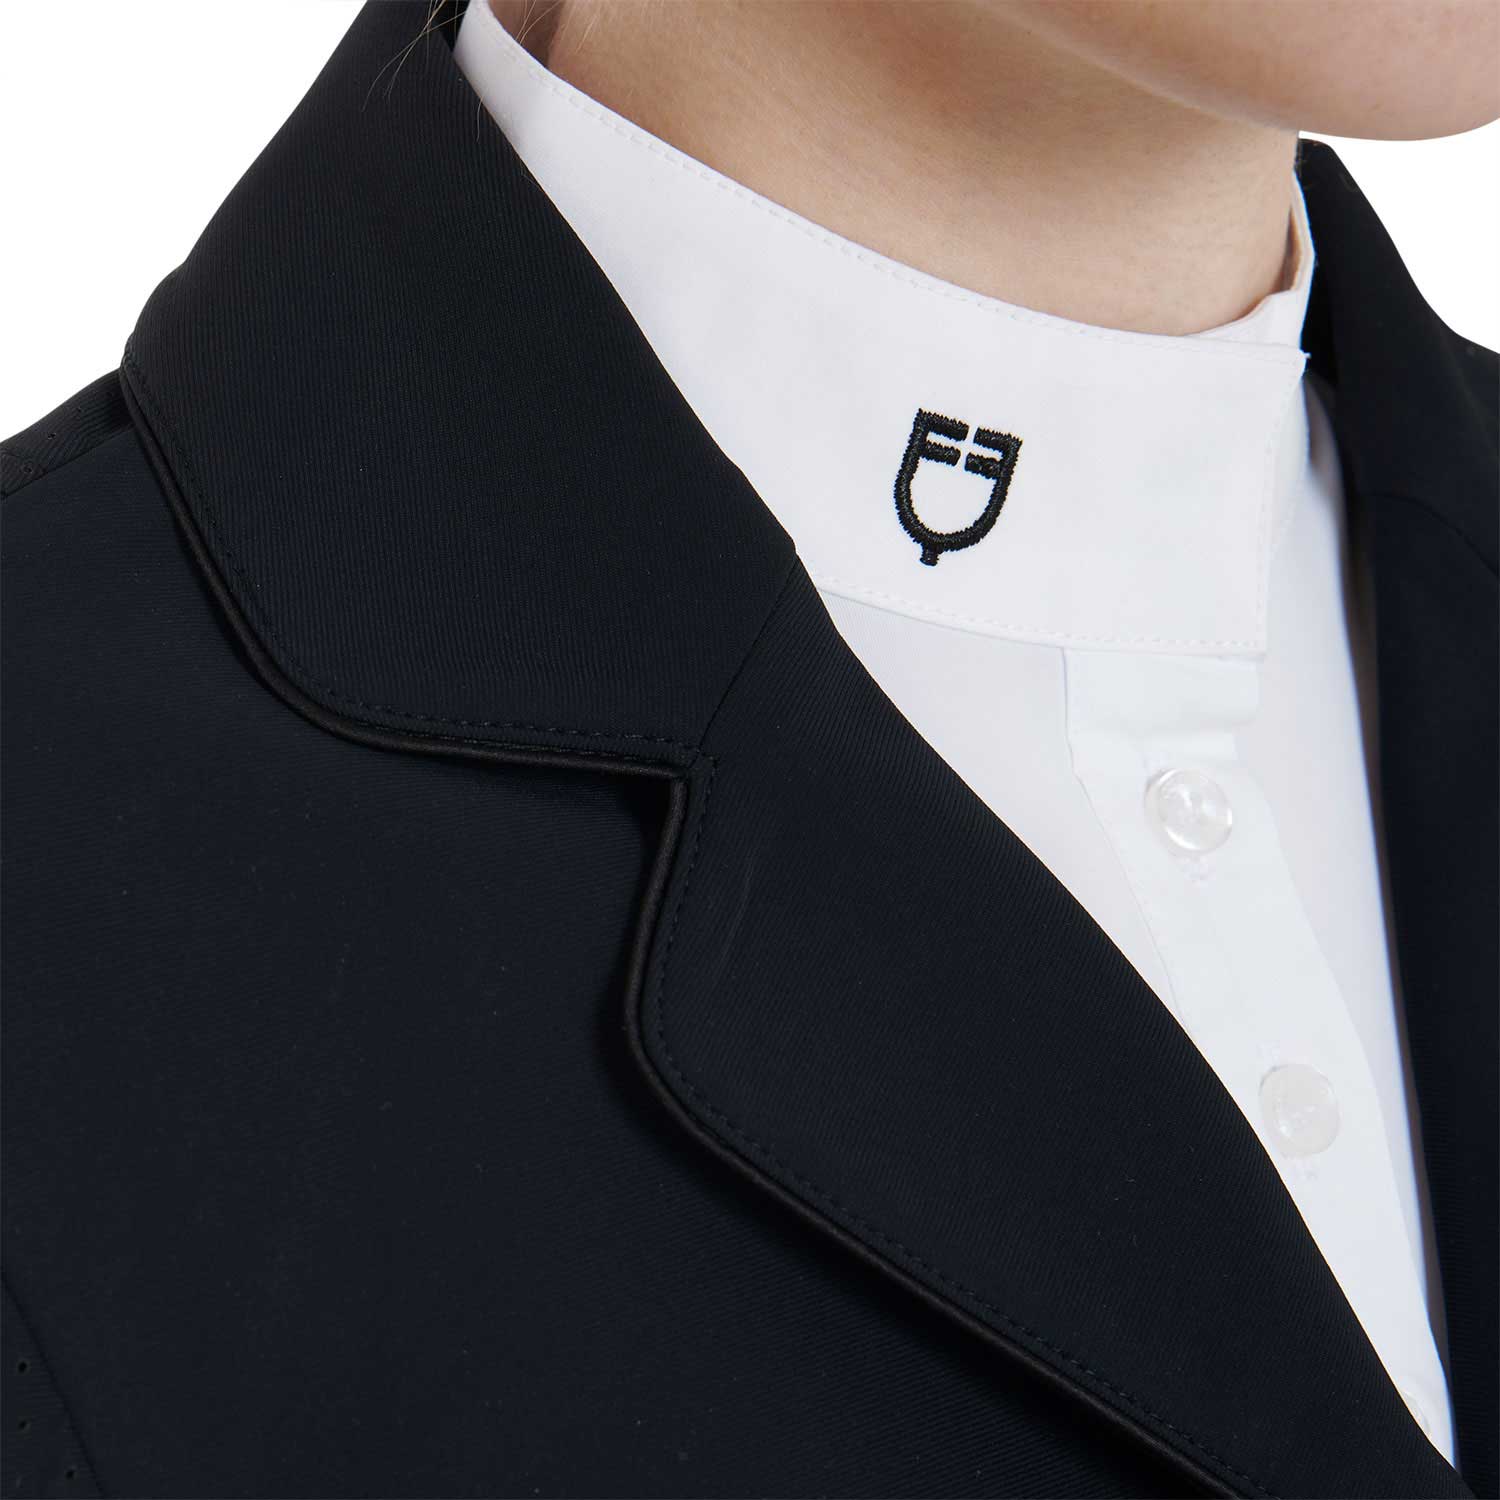 Classic dressage jacket in black for lady equestrian